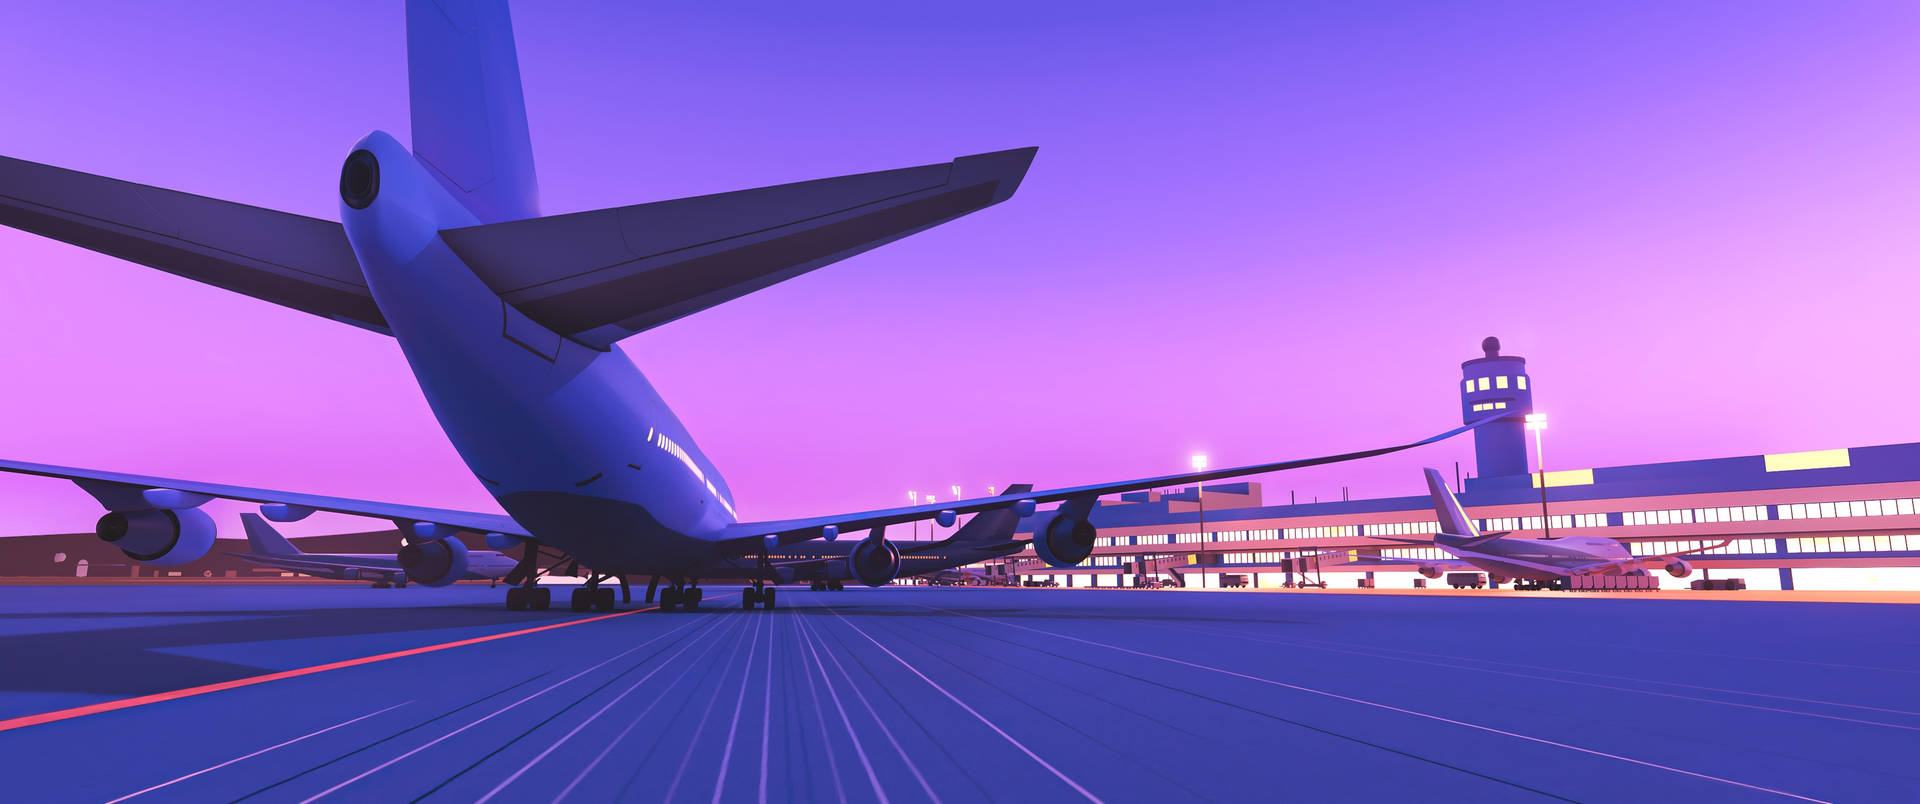 Airport With Blue Violet Sky Wallpaper